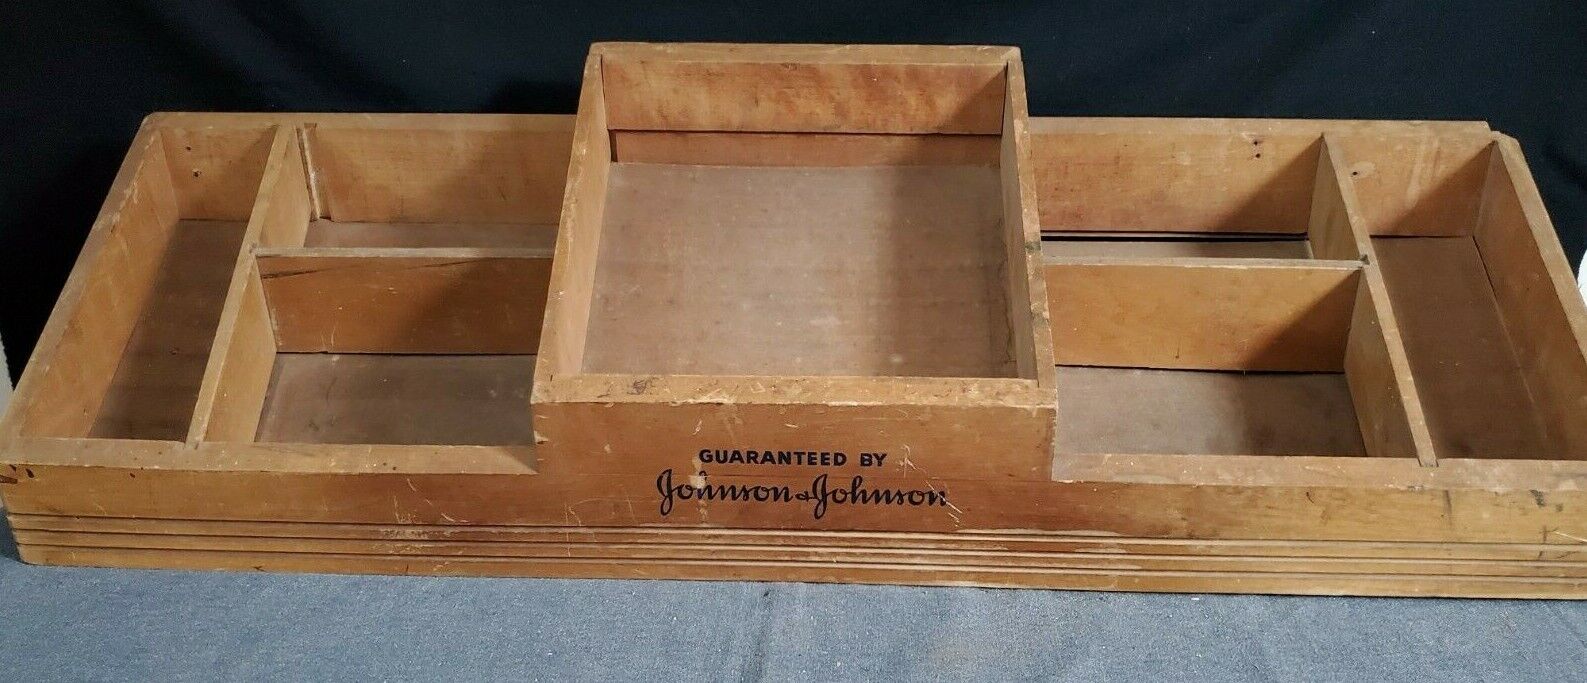 MID 20TH CENTURY DRUGSTORE WOODEN DISPLAY RACK  GUARANTEED BY JO